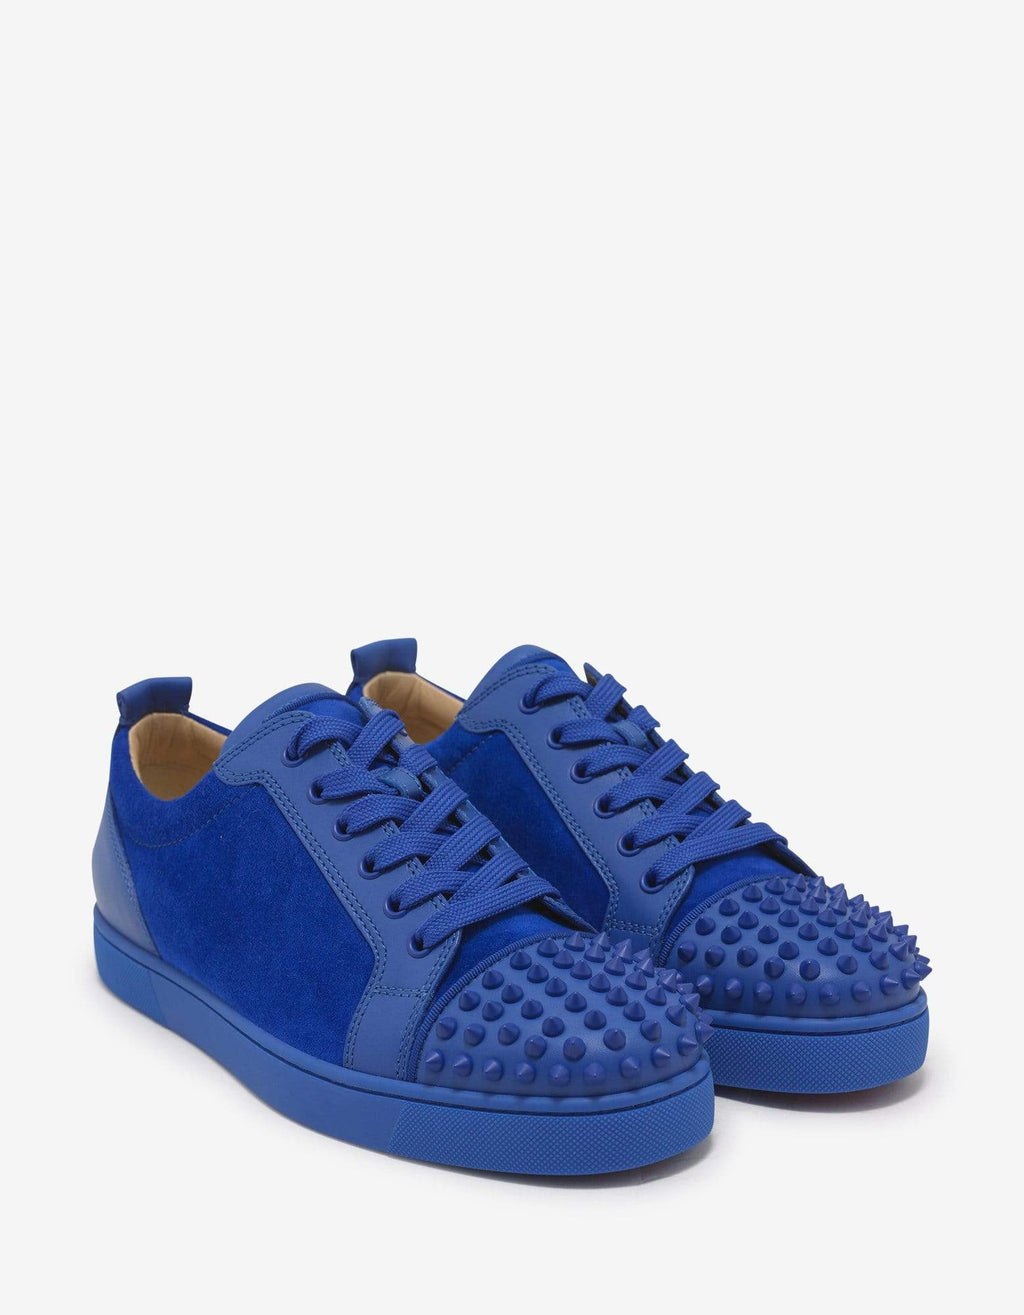 Christian Louboutin Christian Louboutin Louis Junior Spikes Flat Blue Calf & Suede Trainers